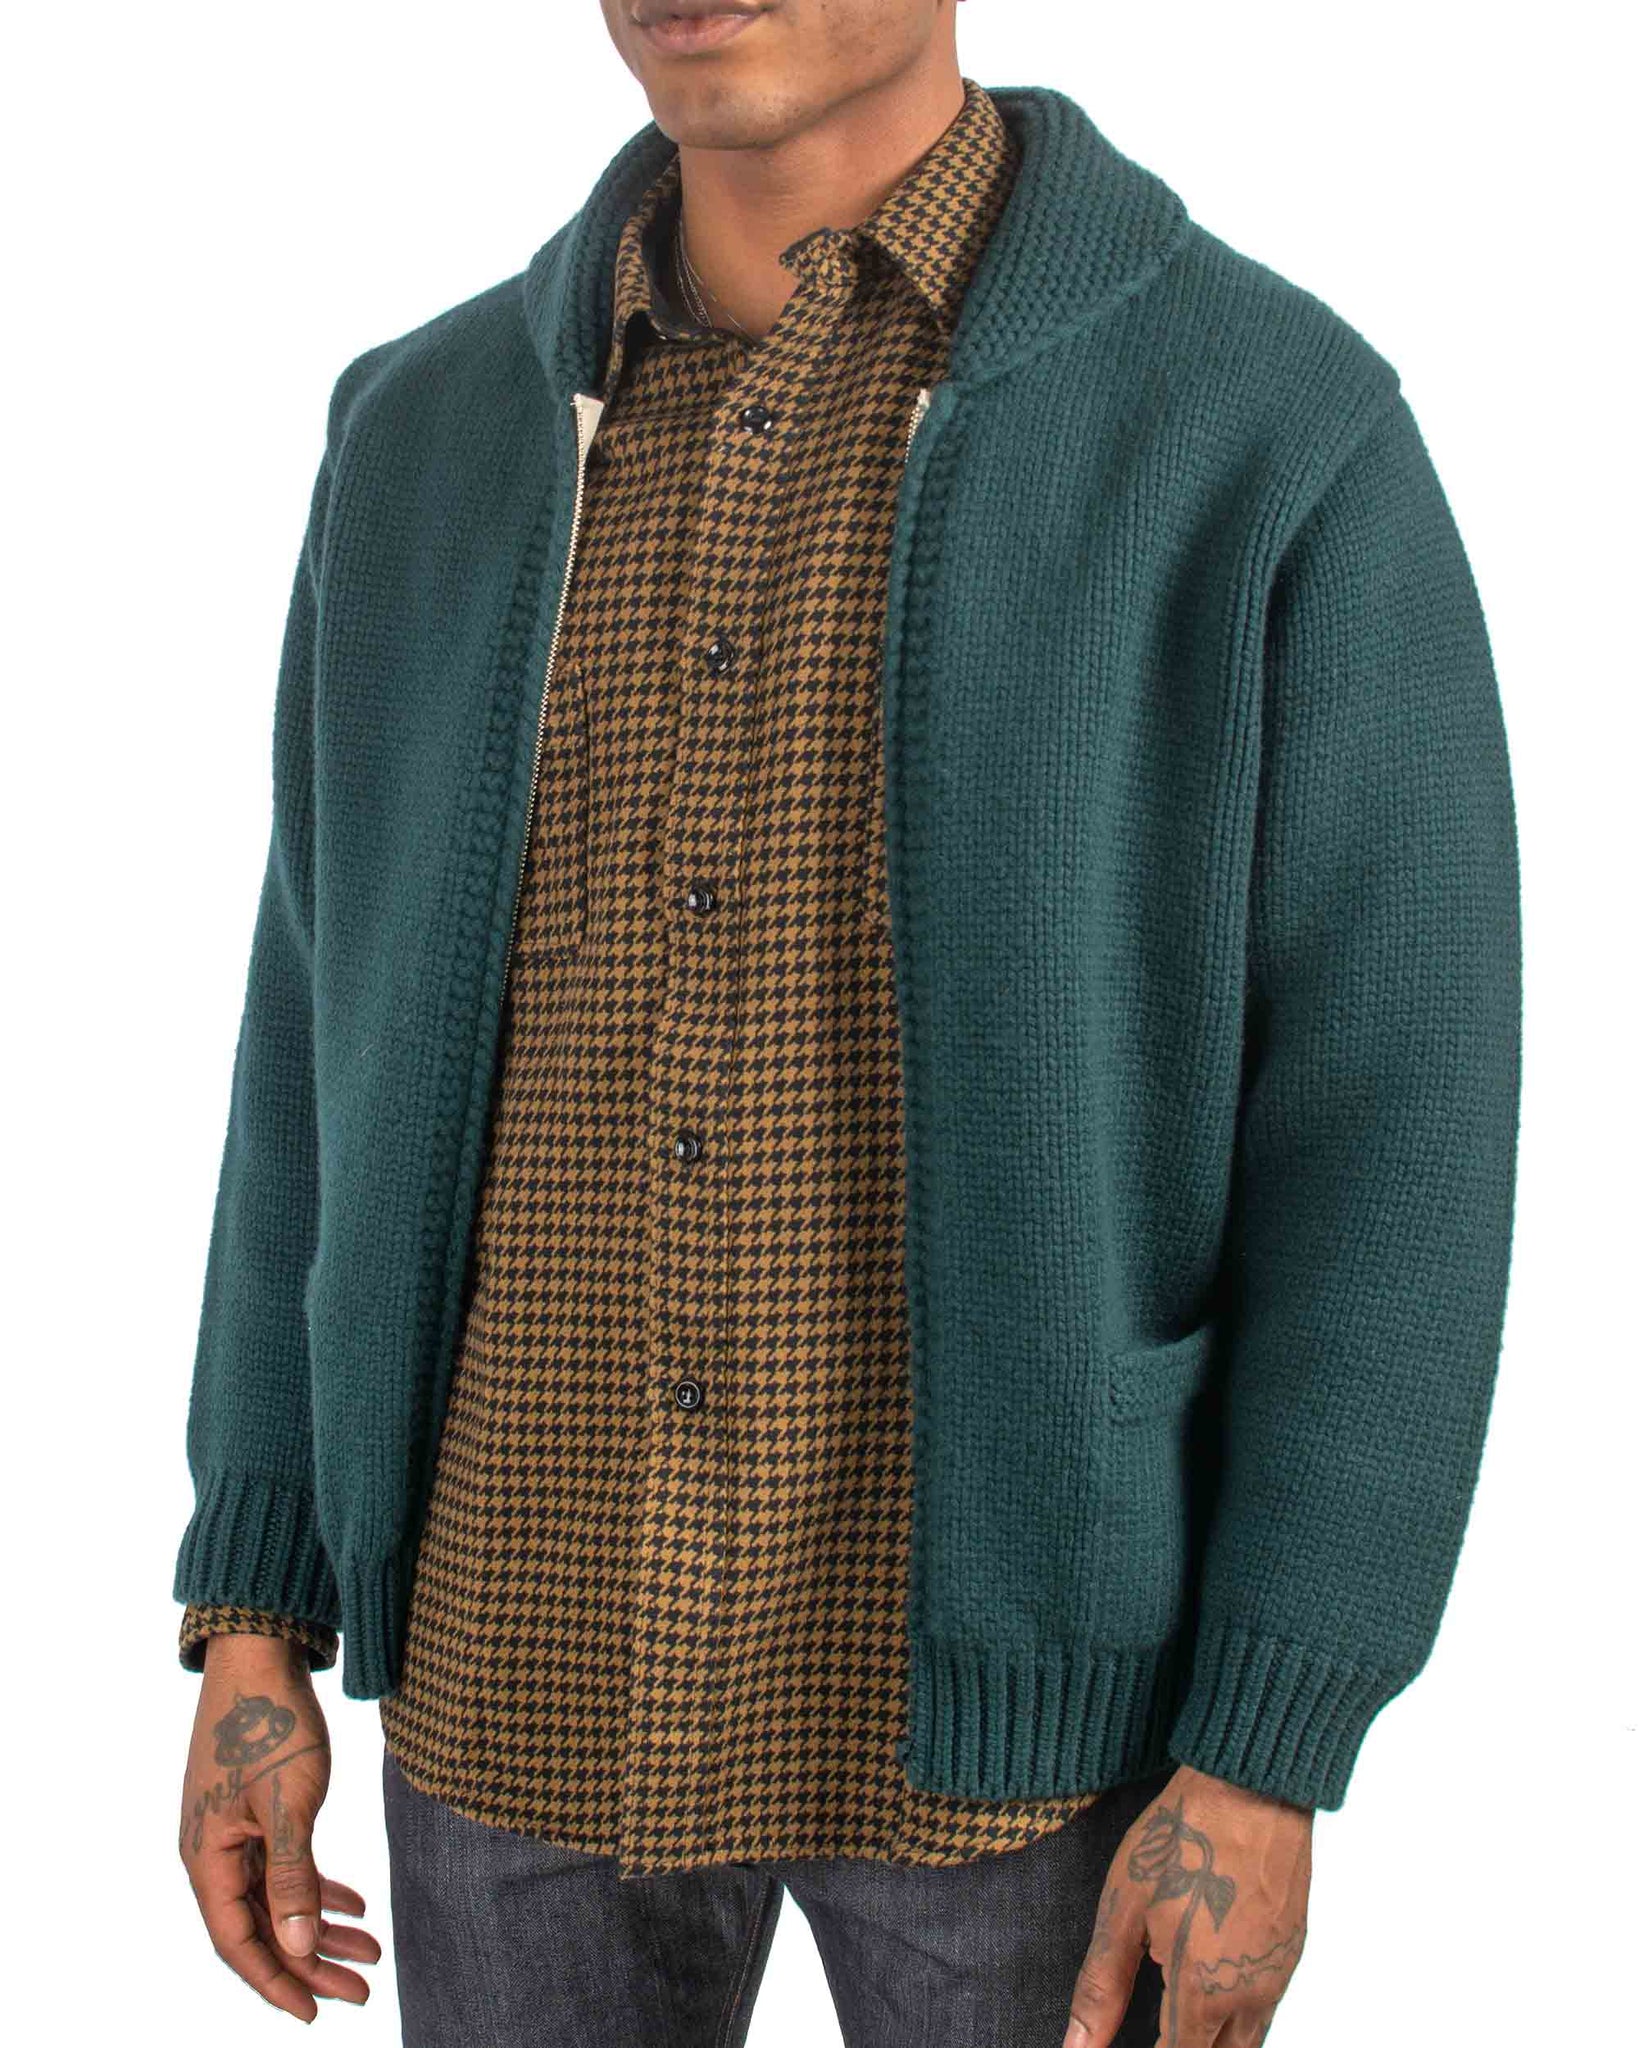 The Real McCoy's MC21113 Heavy Wool Cashmere Sweater Green Close